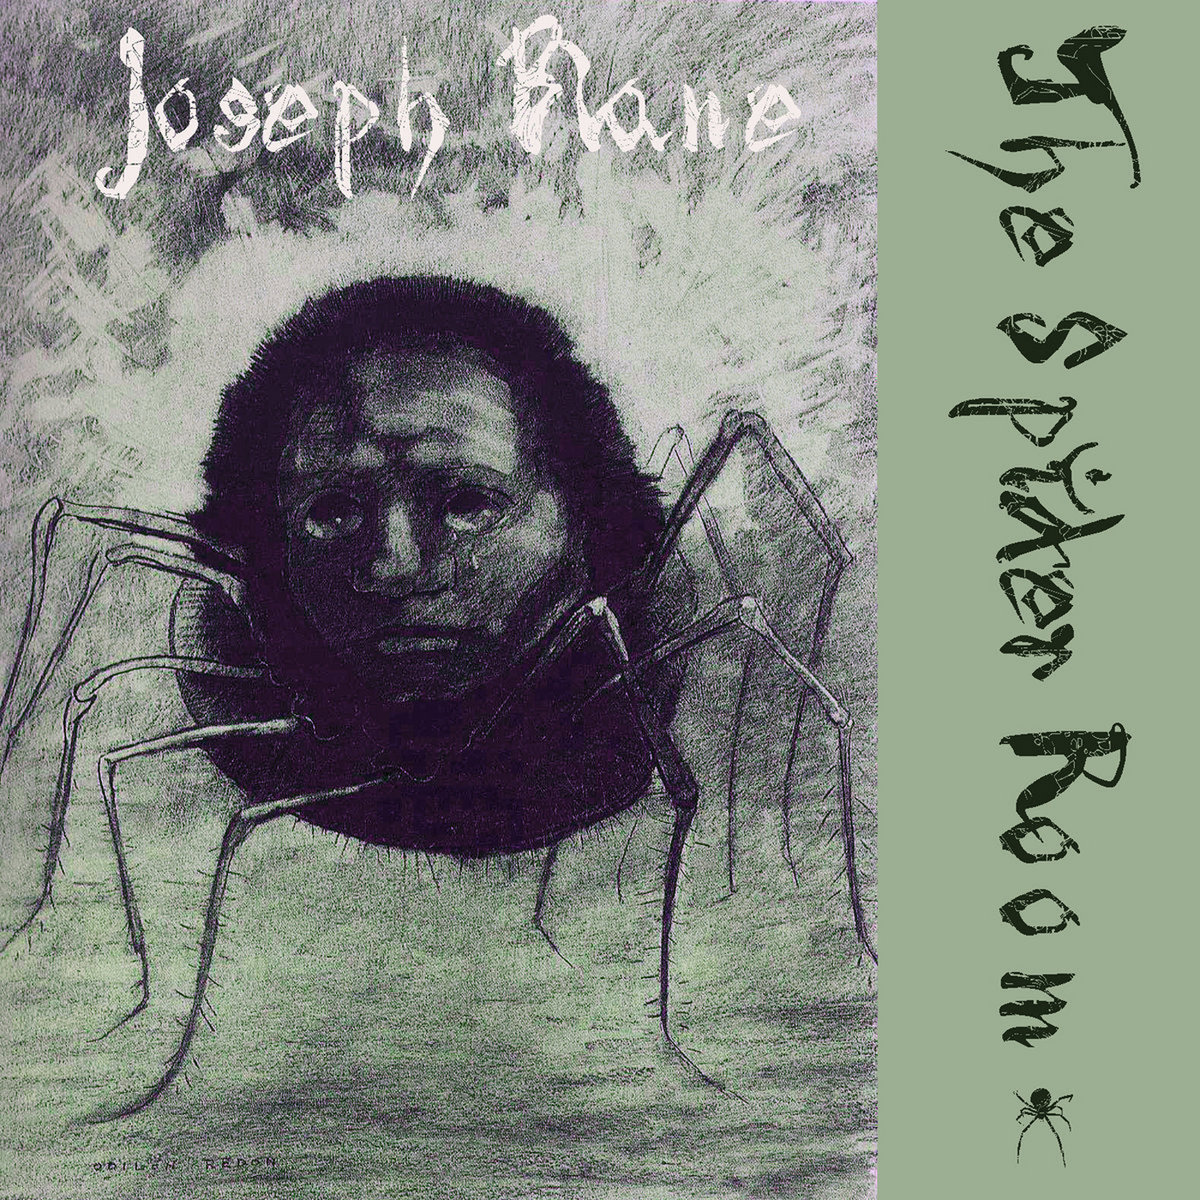 The Spider Room, by Joseph Blane